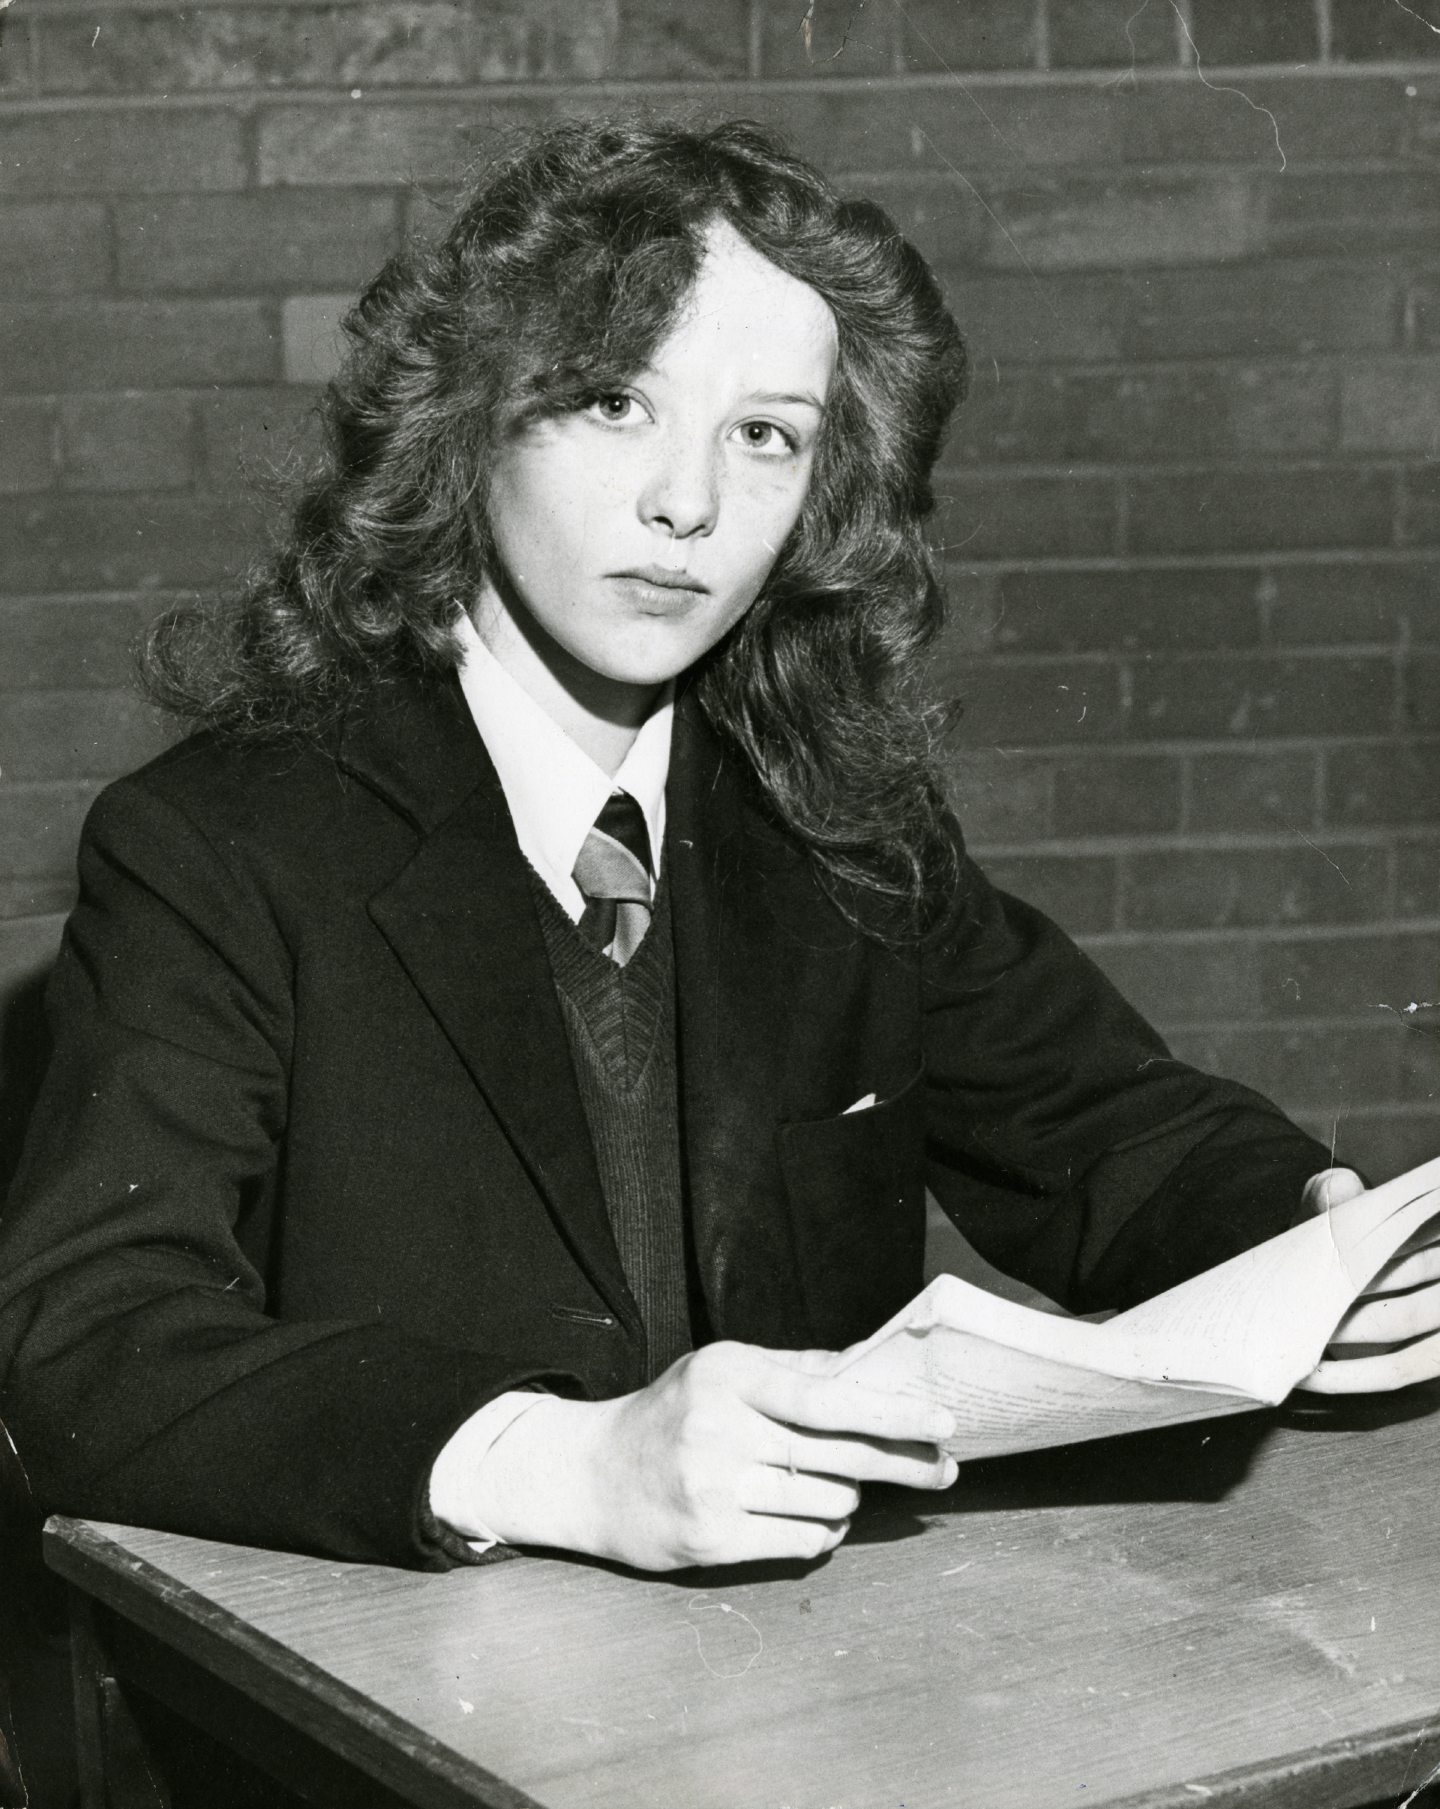 Liz Lynch aged 13 at St Saviour's High in Dundee in 1978. 